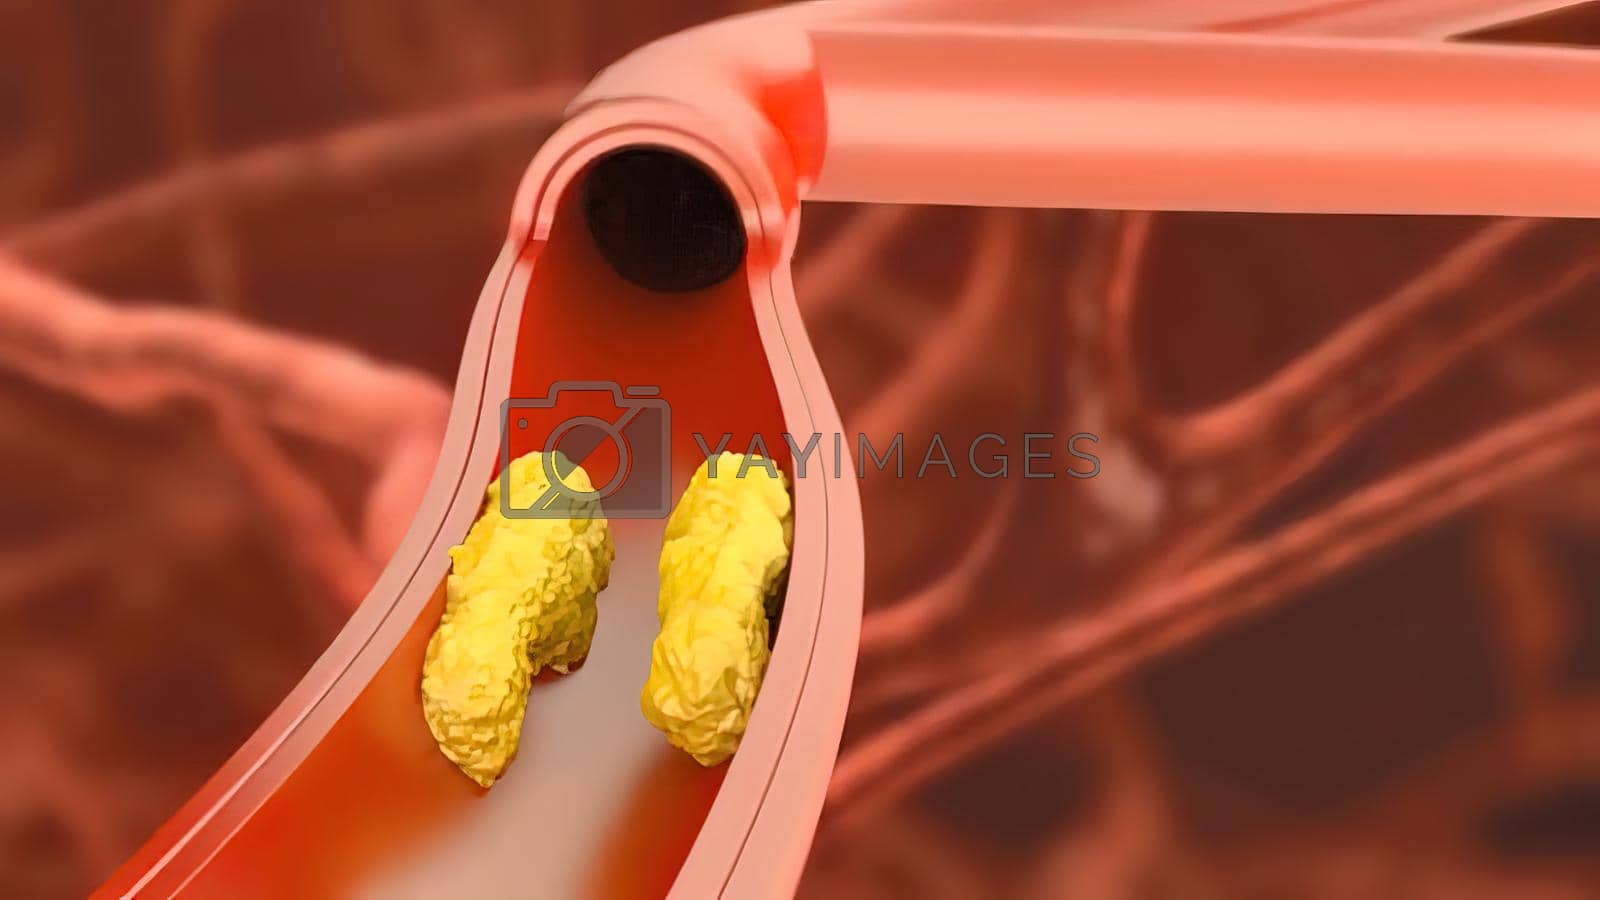 Royalty free image of Atherosclerosis, plaque buildup and thickening of the arteries in the inner lining of an artery 3D medical illustration by creativepic